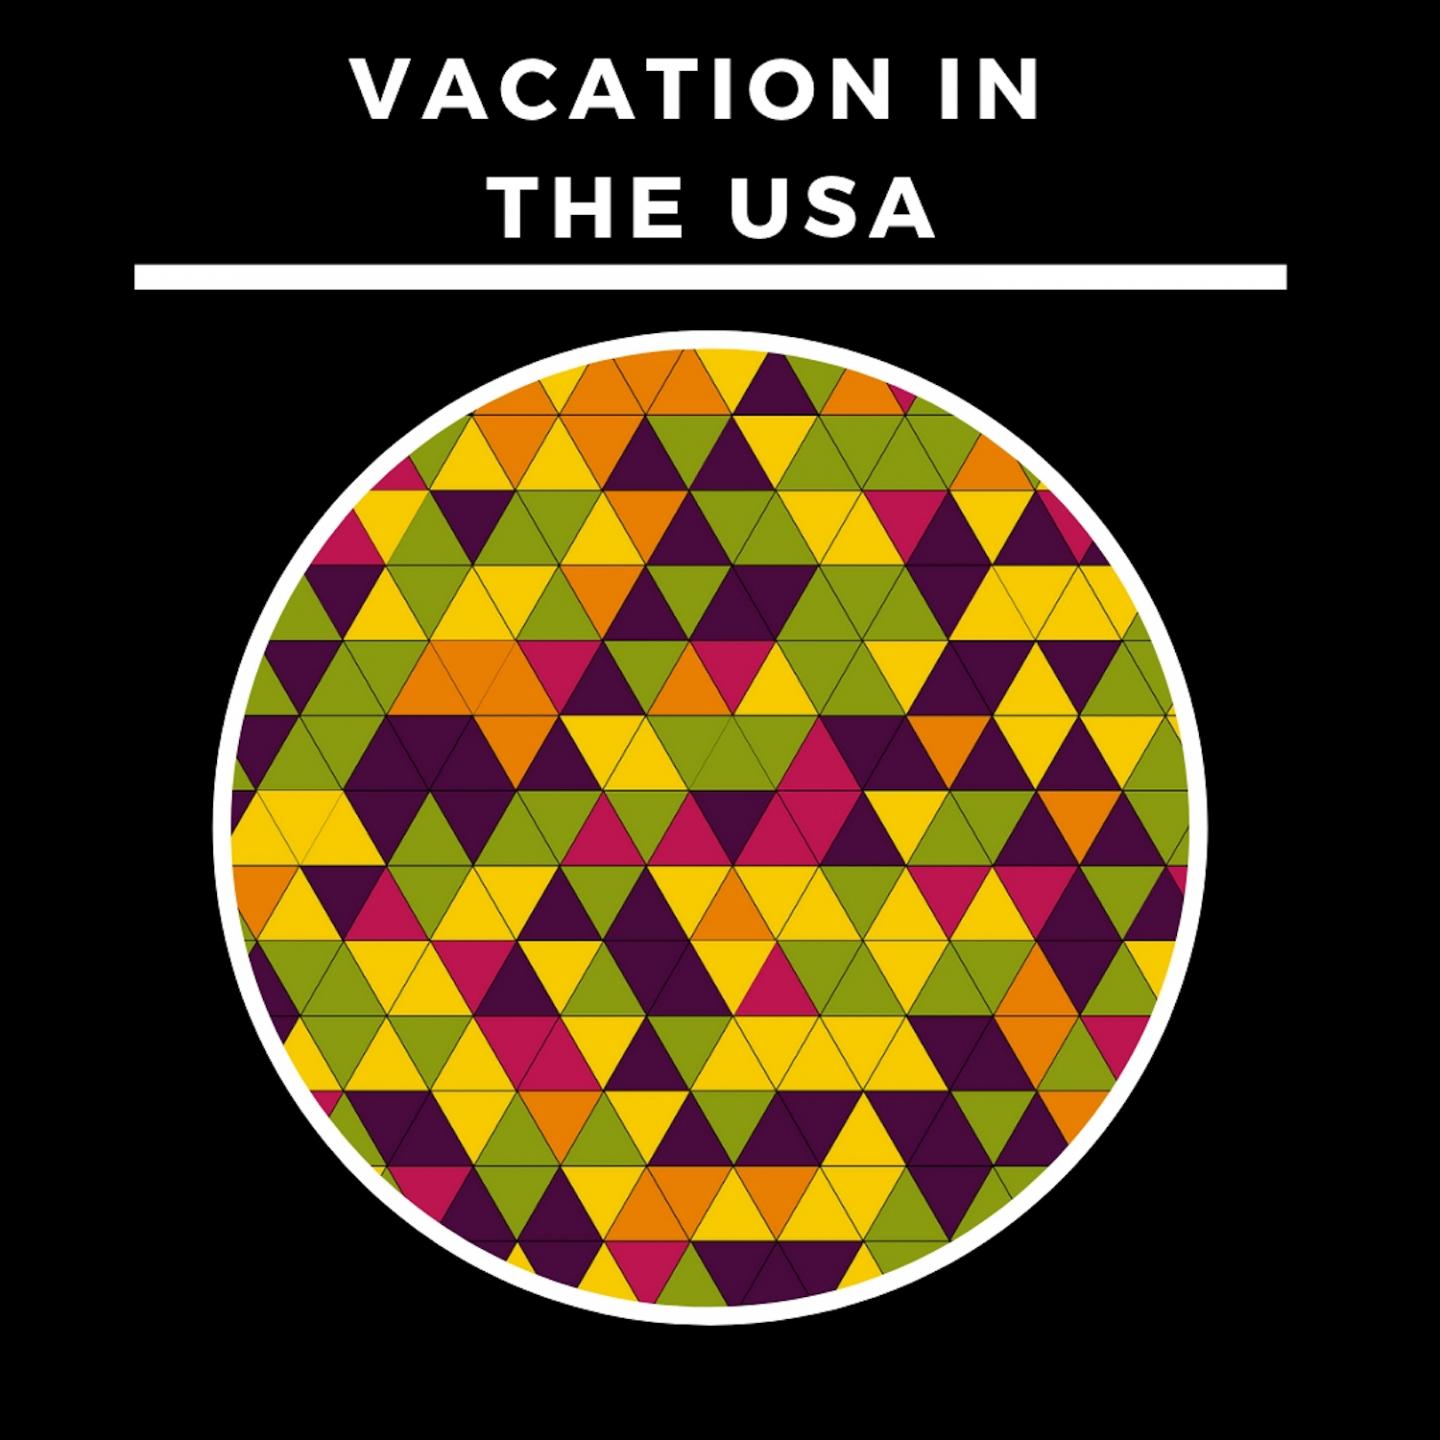 Vacation in the USA